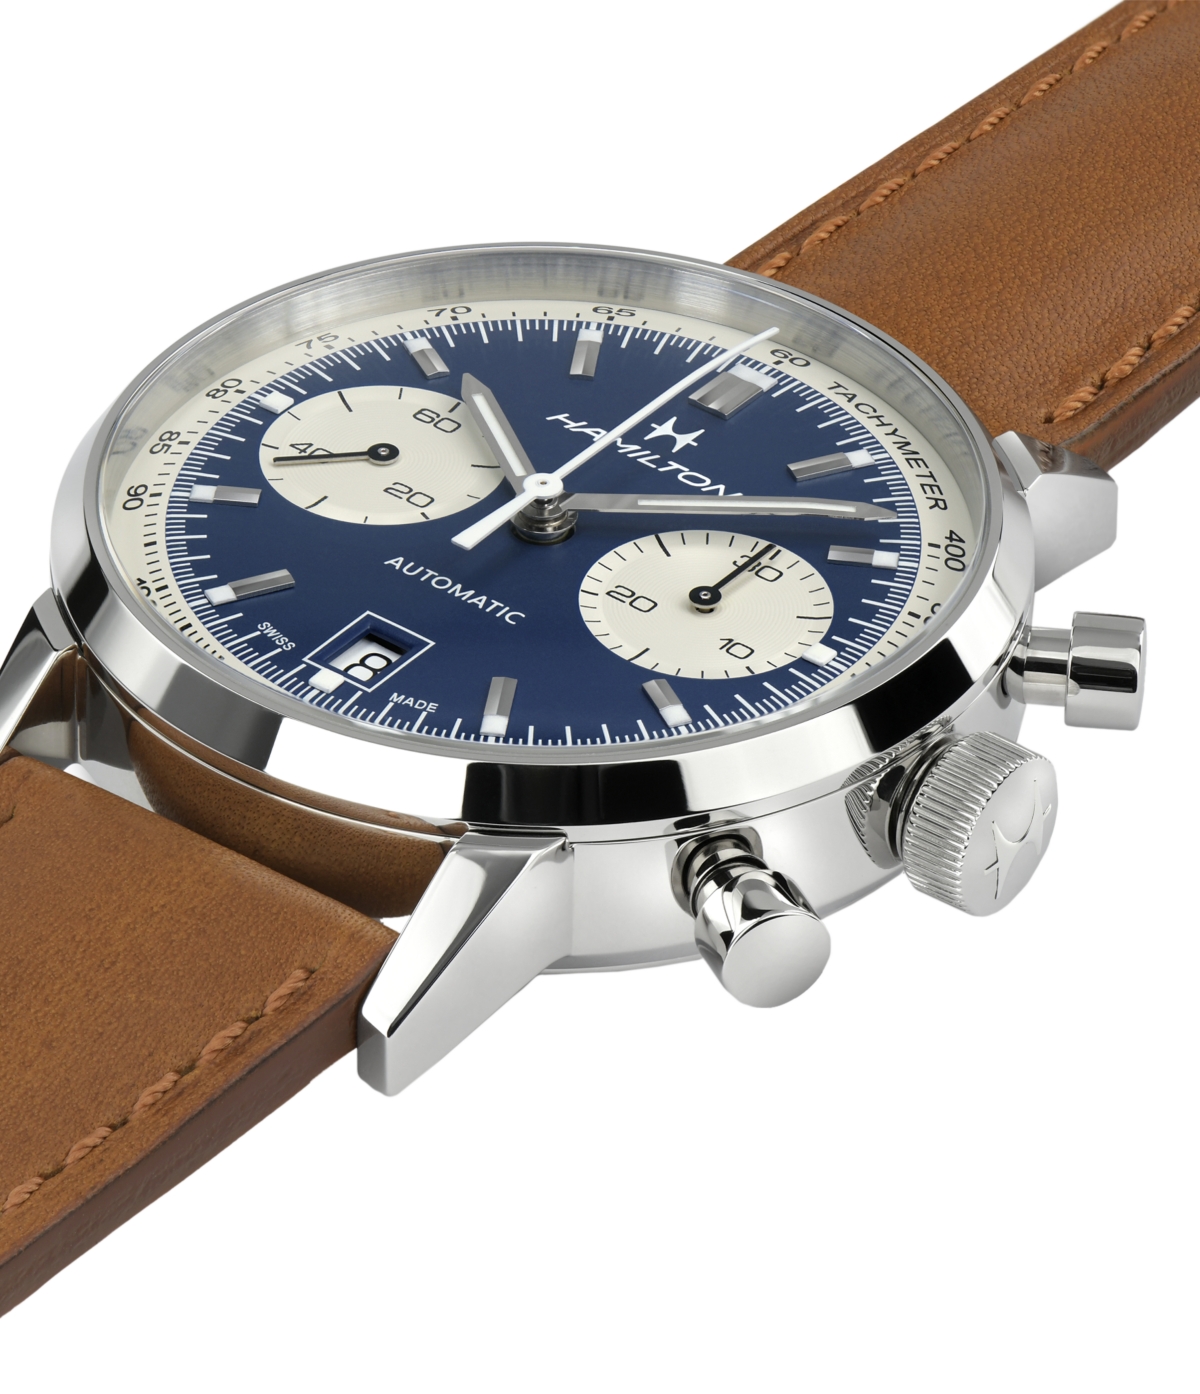 Shop Hamilton Men's Swiss Automatic Chronograph Intra-matic Brown Leather Strap Watch 40mm